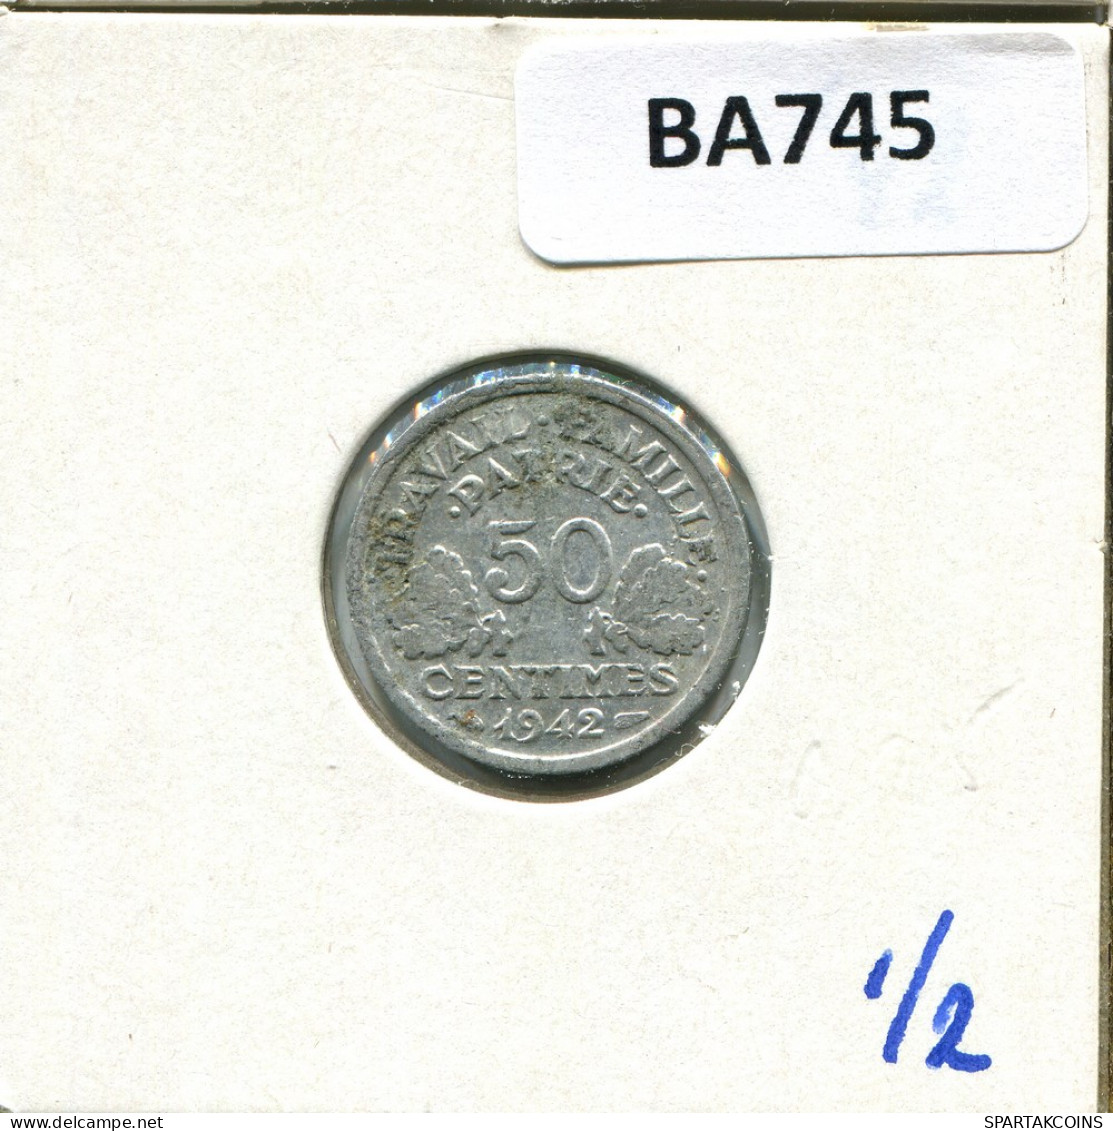 50 CENTIMES 1942 FRANCE French Coin #BA745 - 50 Centimes